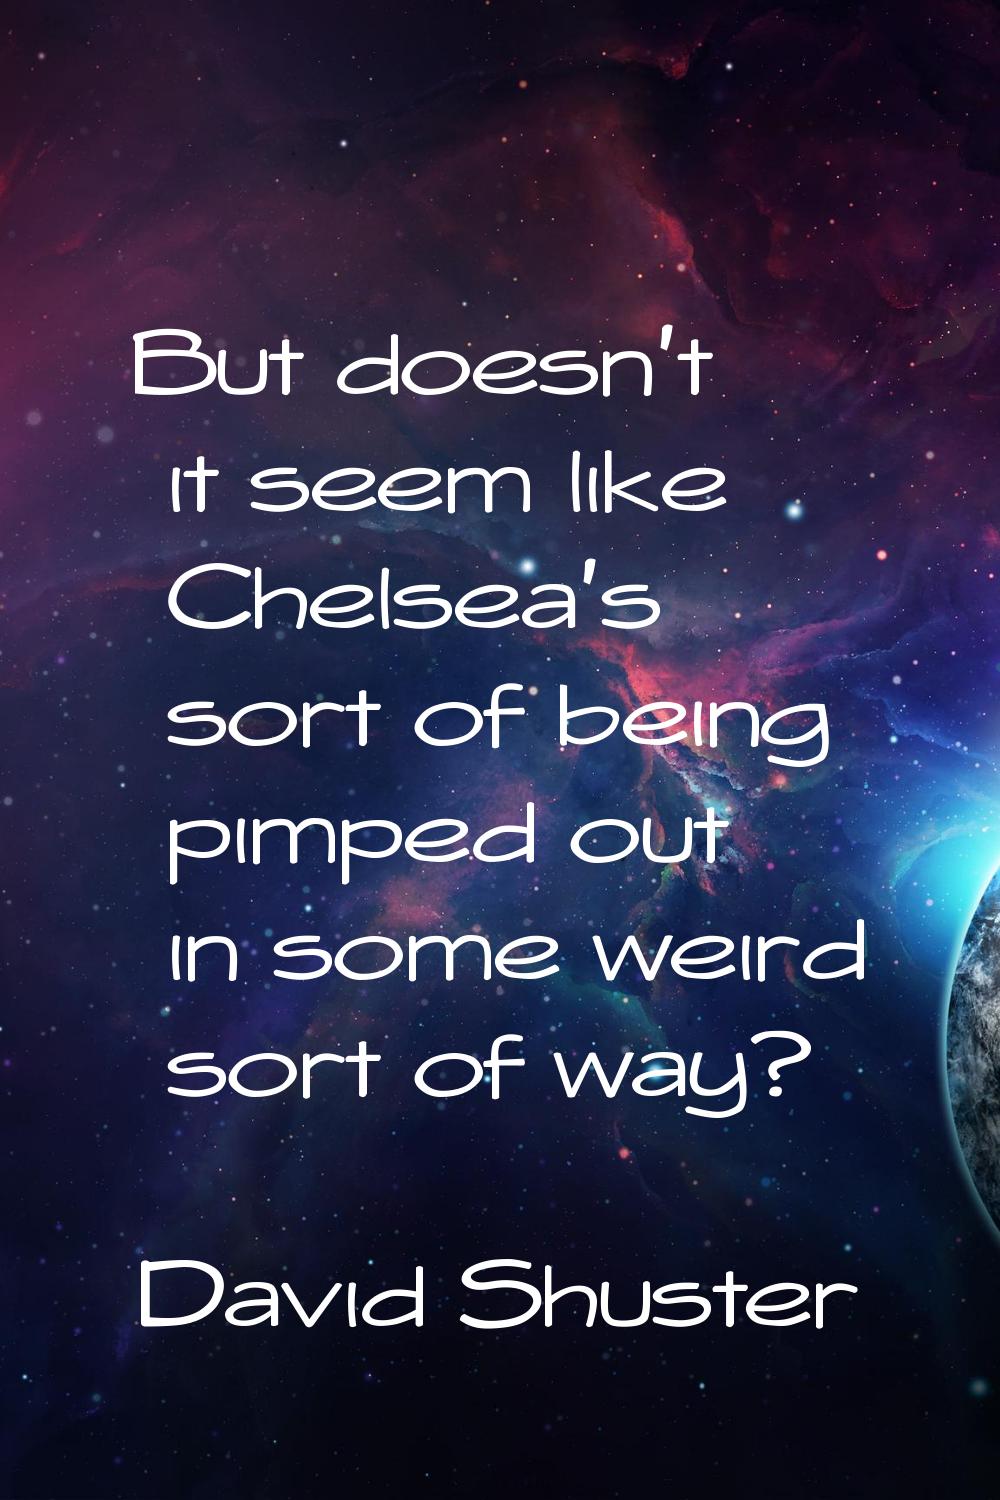 But doesn't it seem like Chelsea's sort of being pimped out in some weird sort of way?